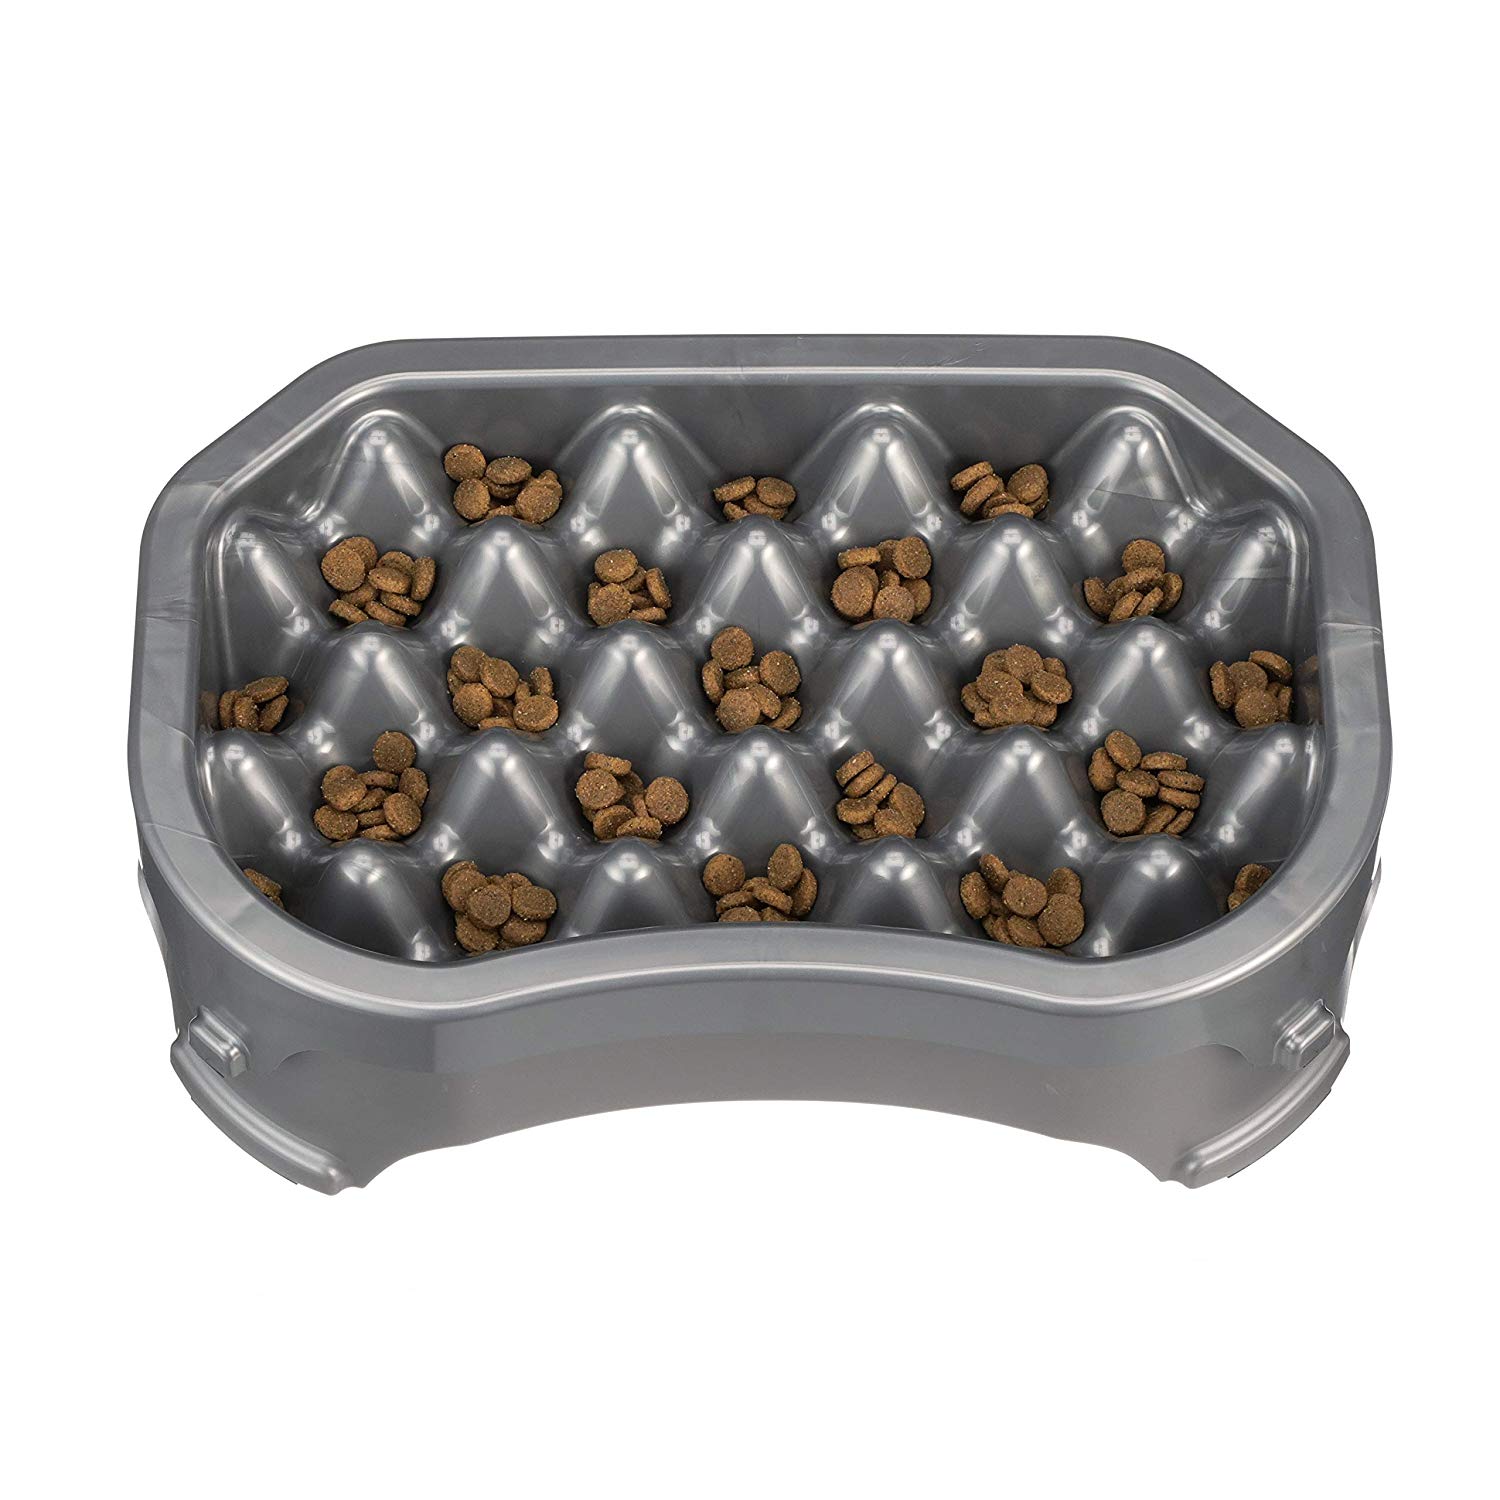 NEATER PET BRANDS Neater Slow Feeder & Accessories 